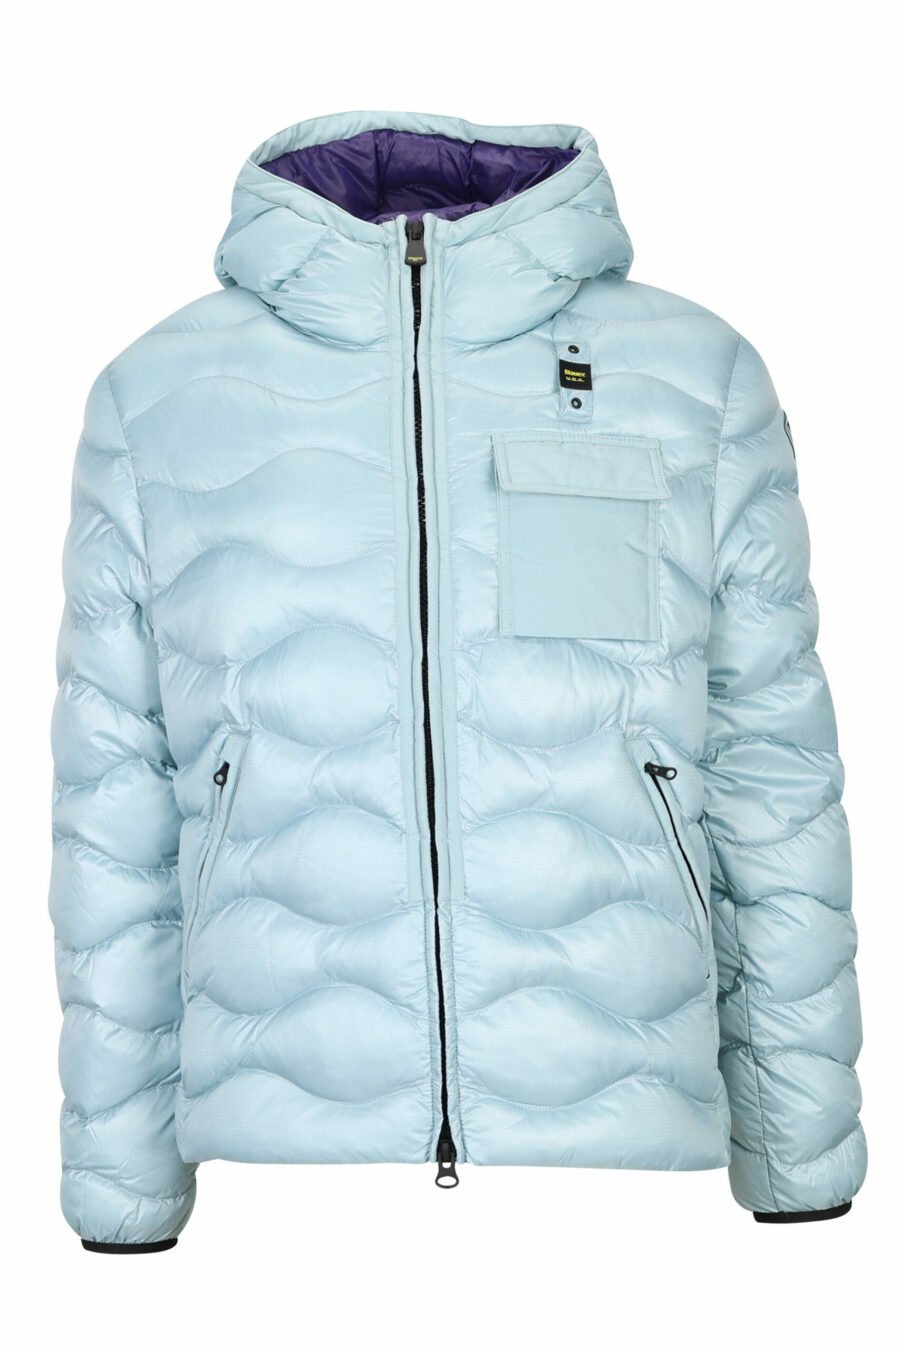 Light blue hooded hooded jacket with wavy lines and violet lining - 8058610697198 scaled